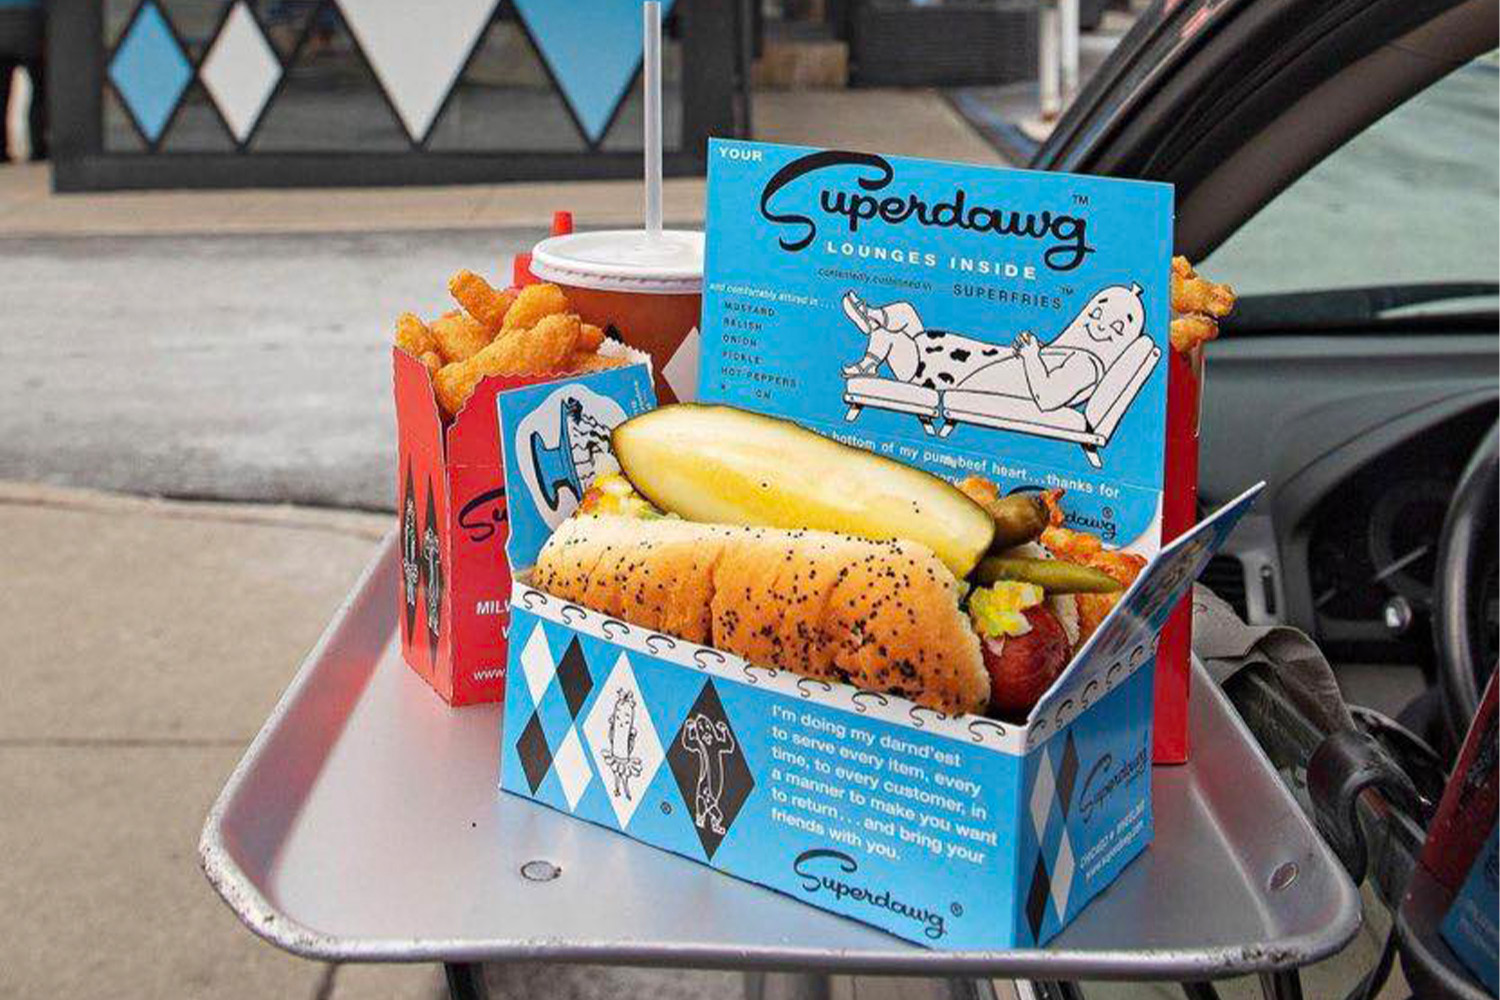 Hot dog from Superdawg